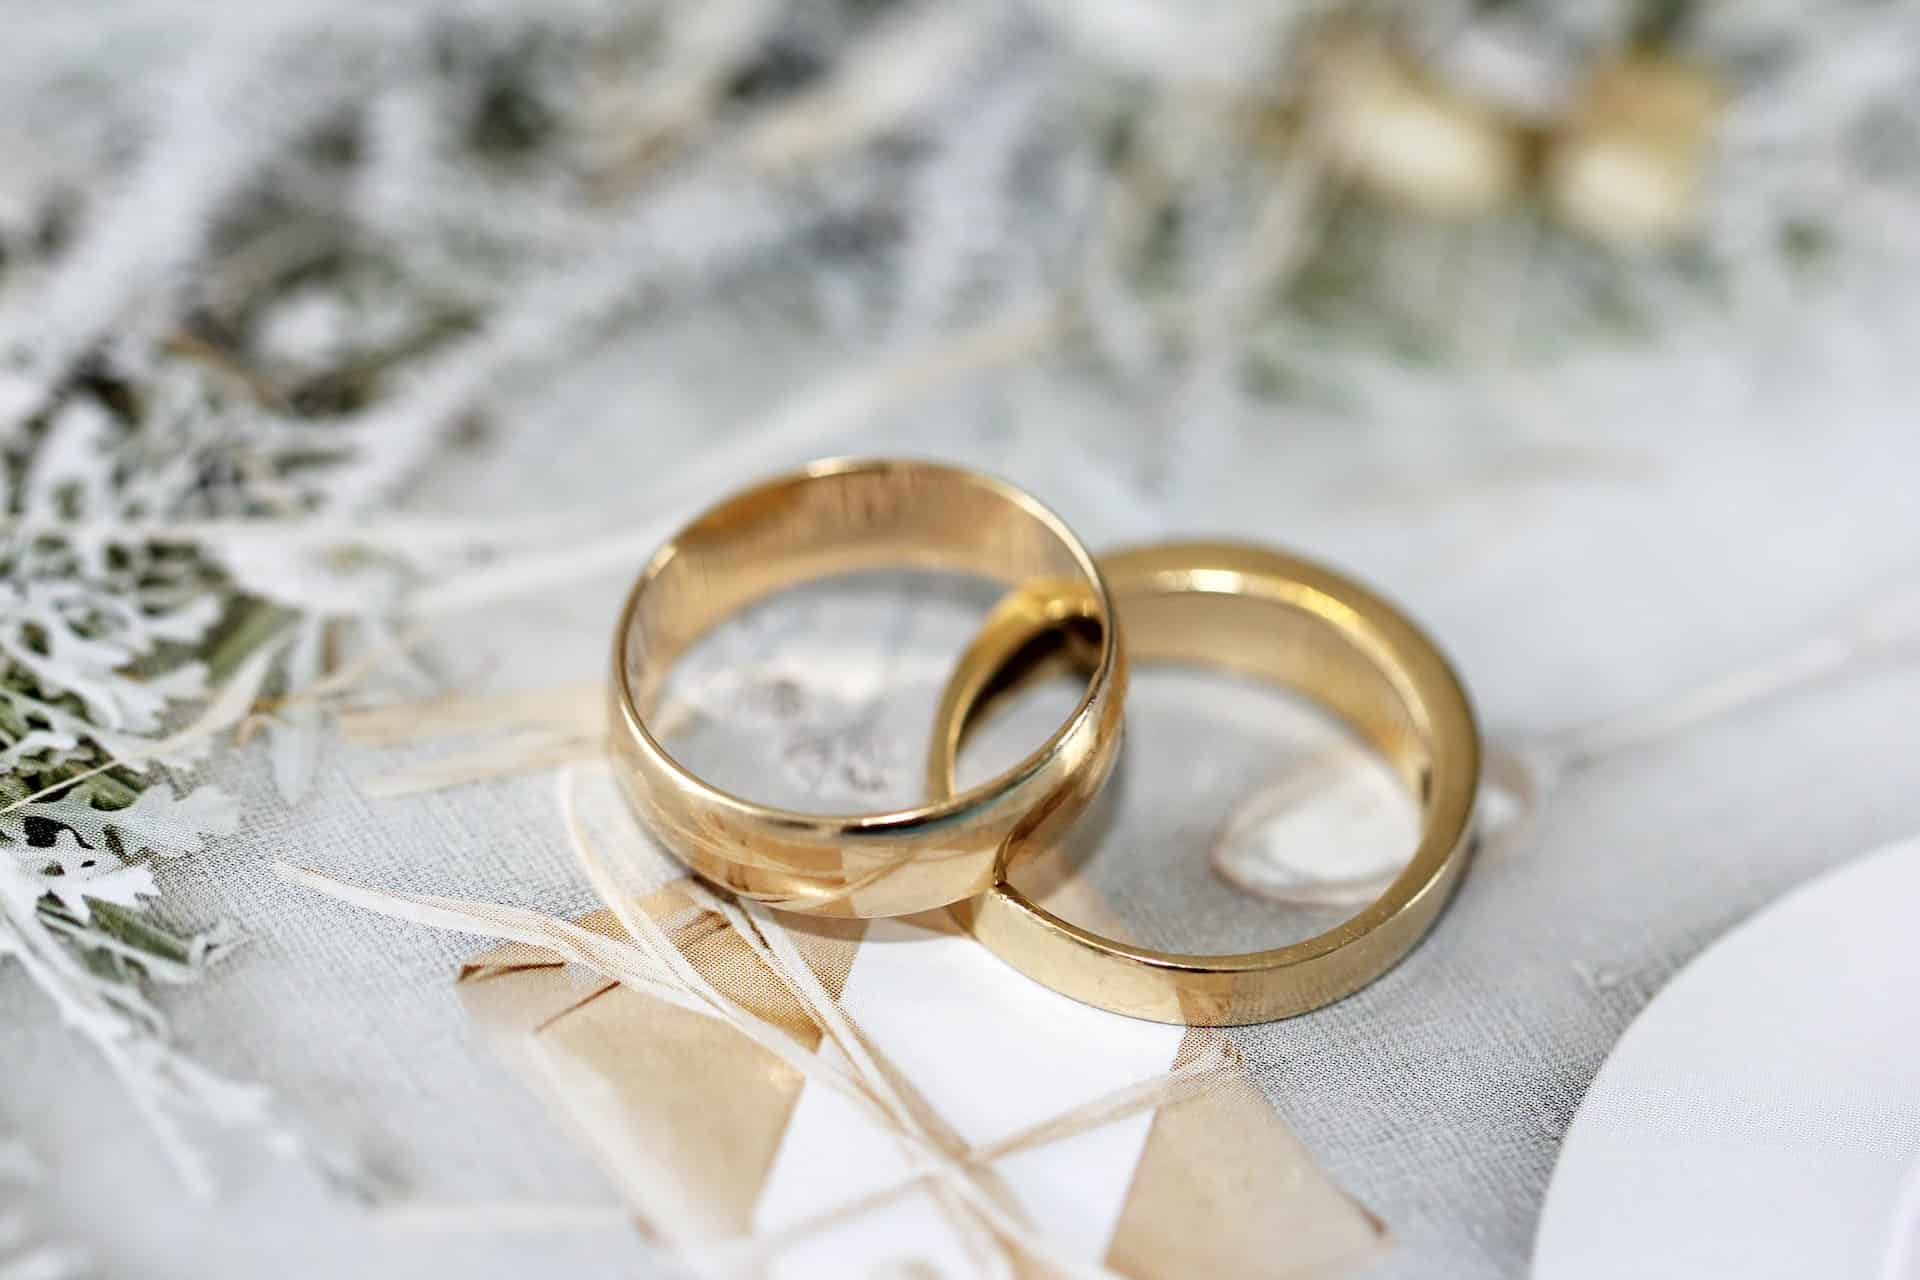 Men's & Women's Wedding Rings: How Are They Different?